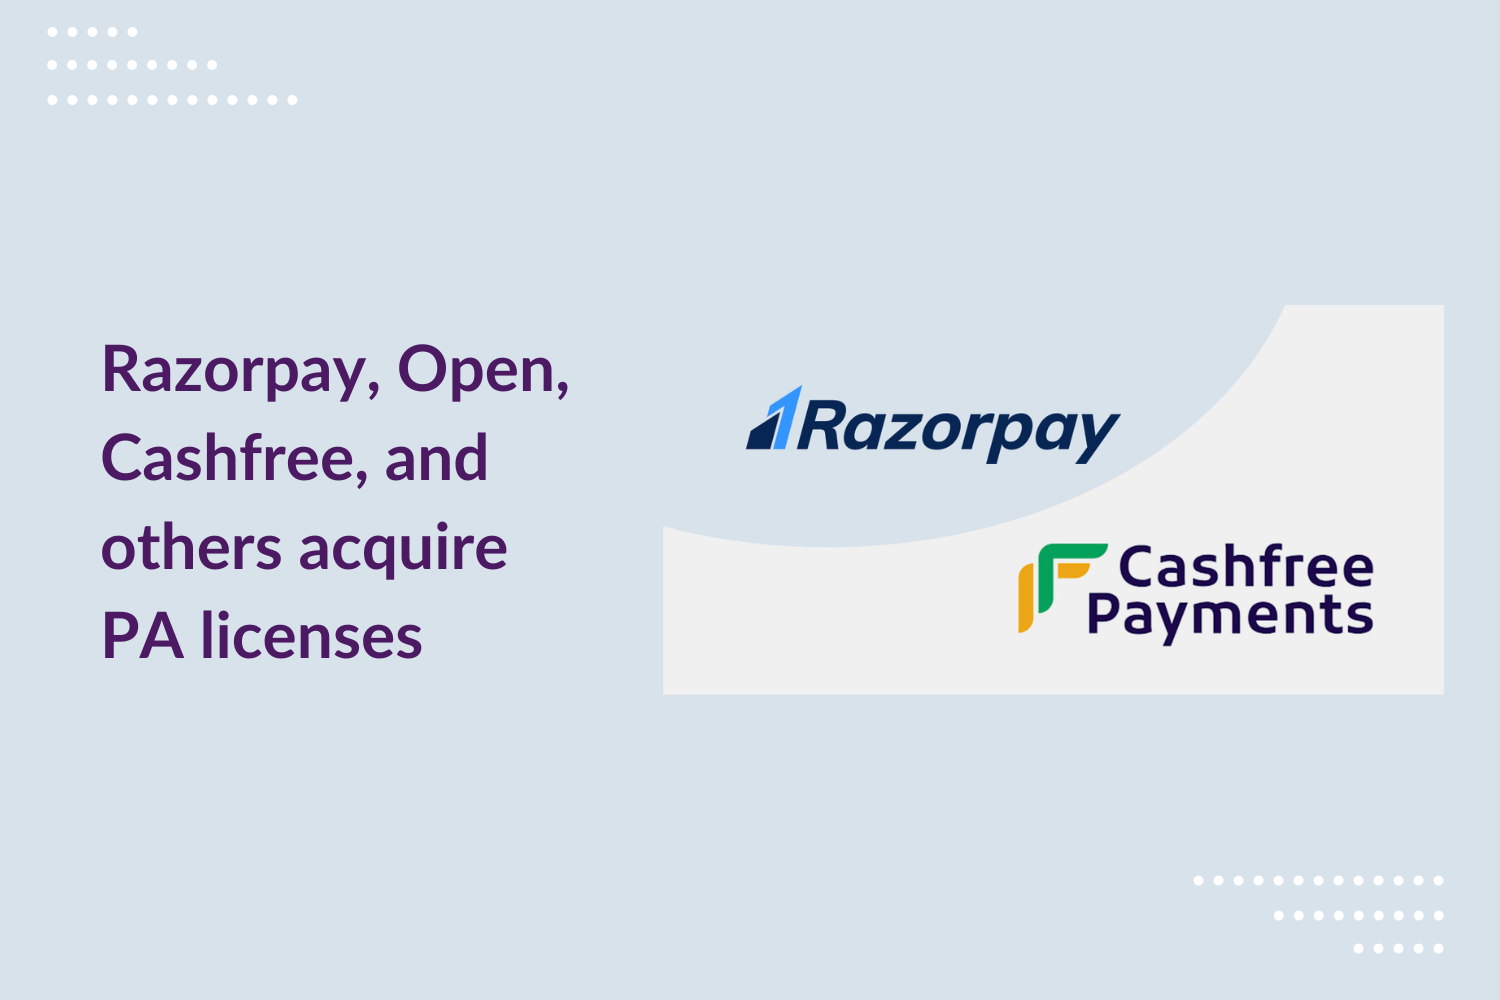 Razorpay, Open, Cashfree, and others acquire Payment Aggregator licenses